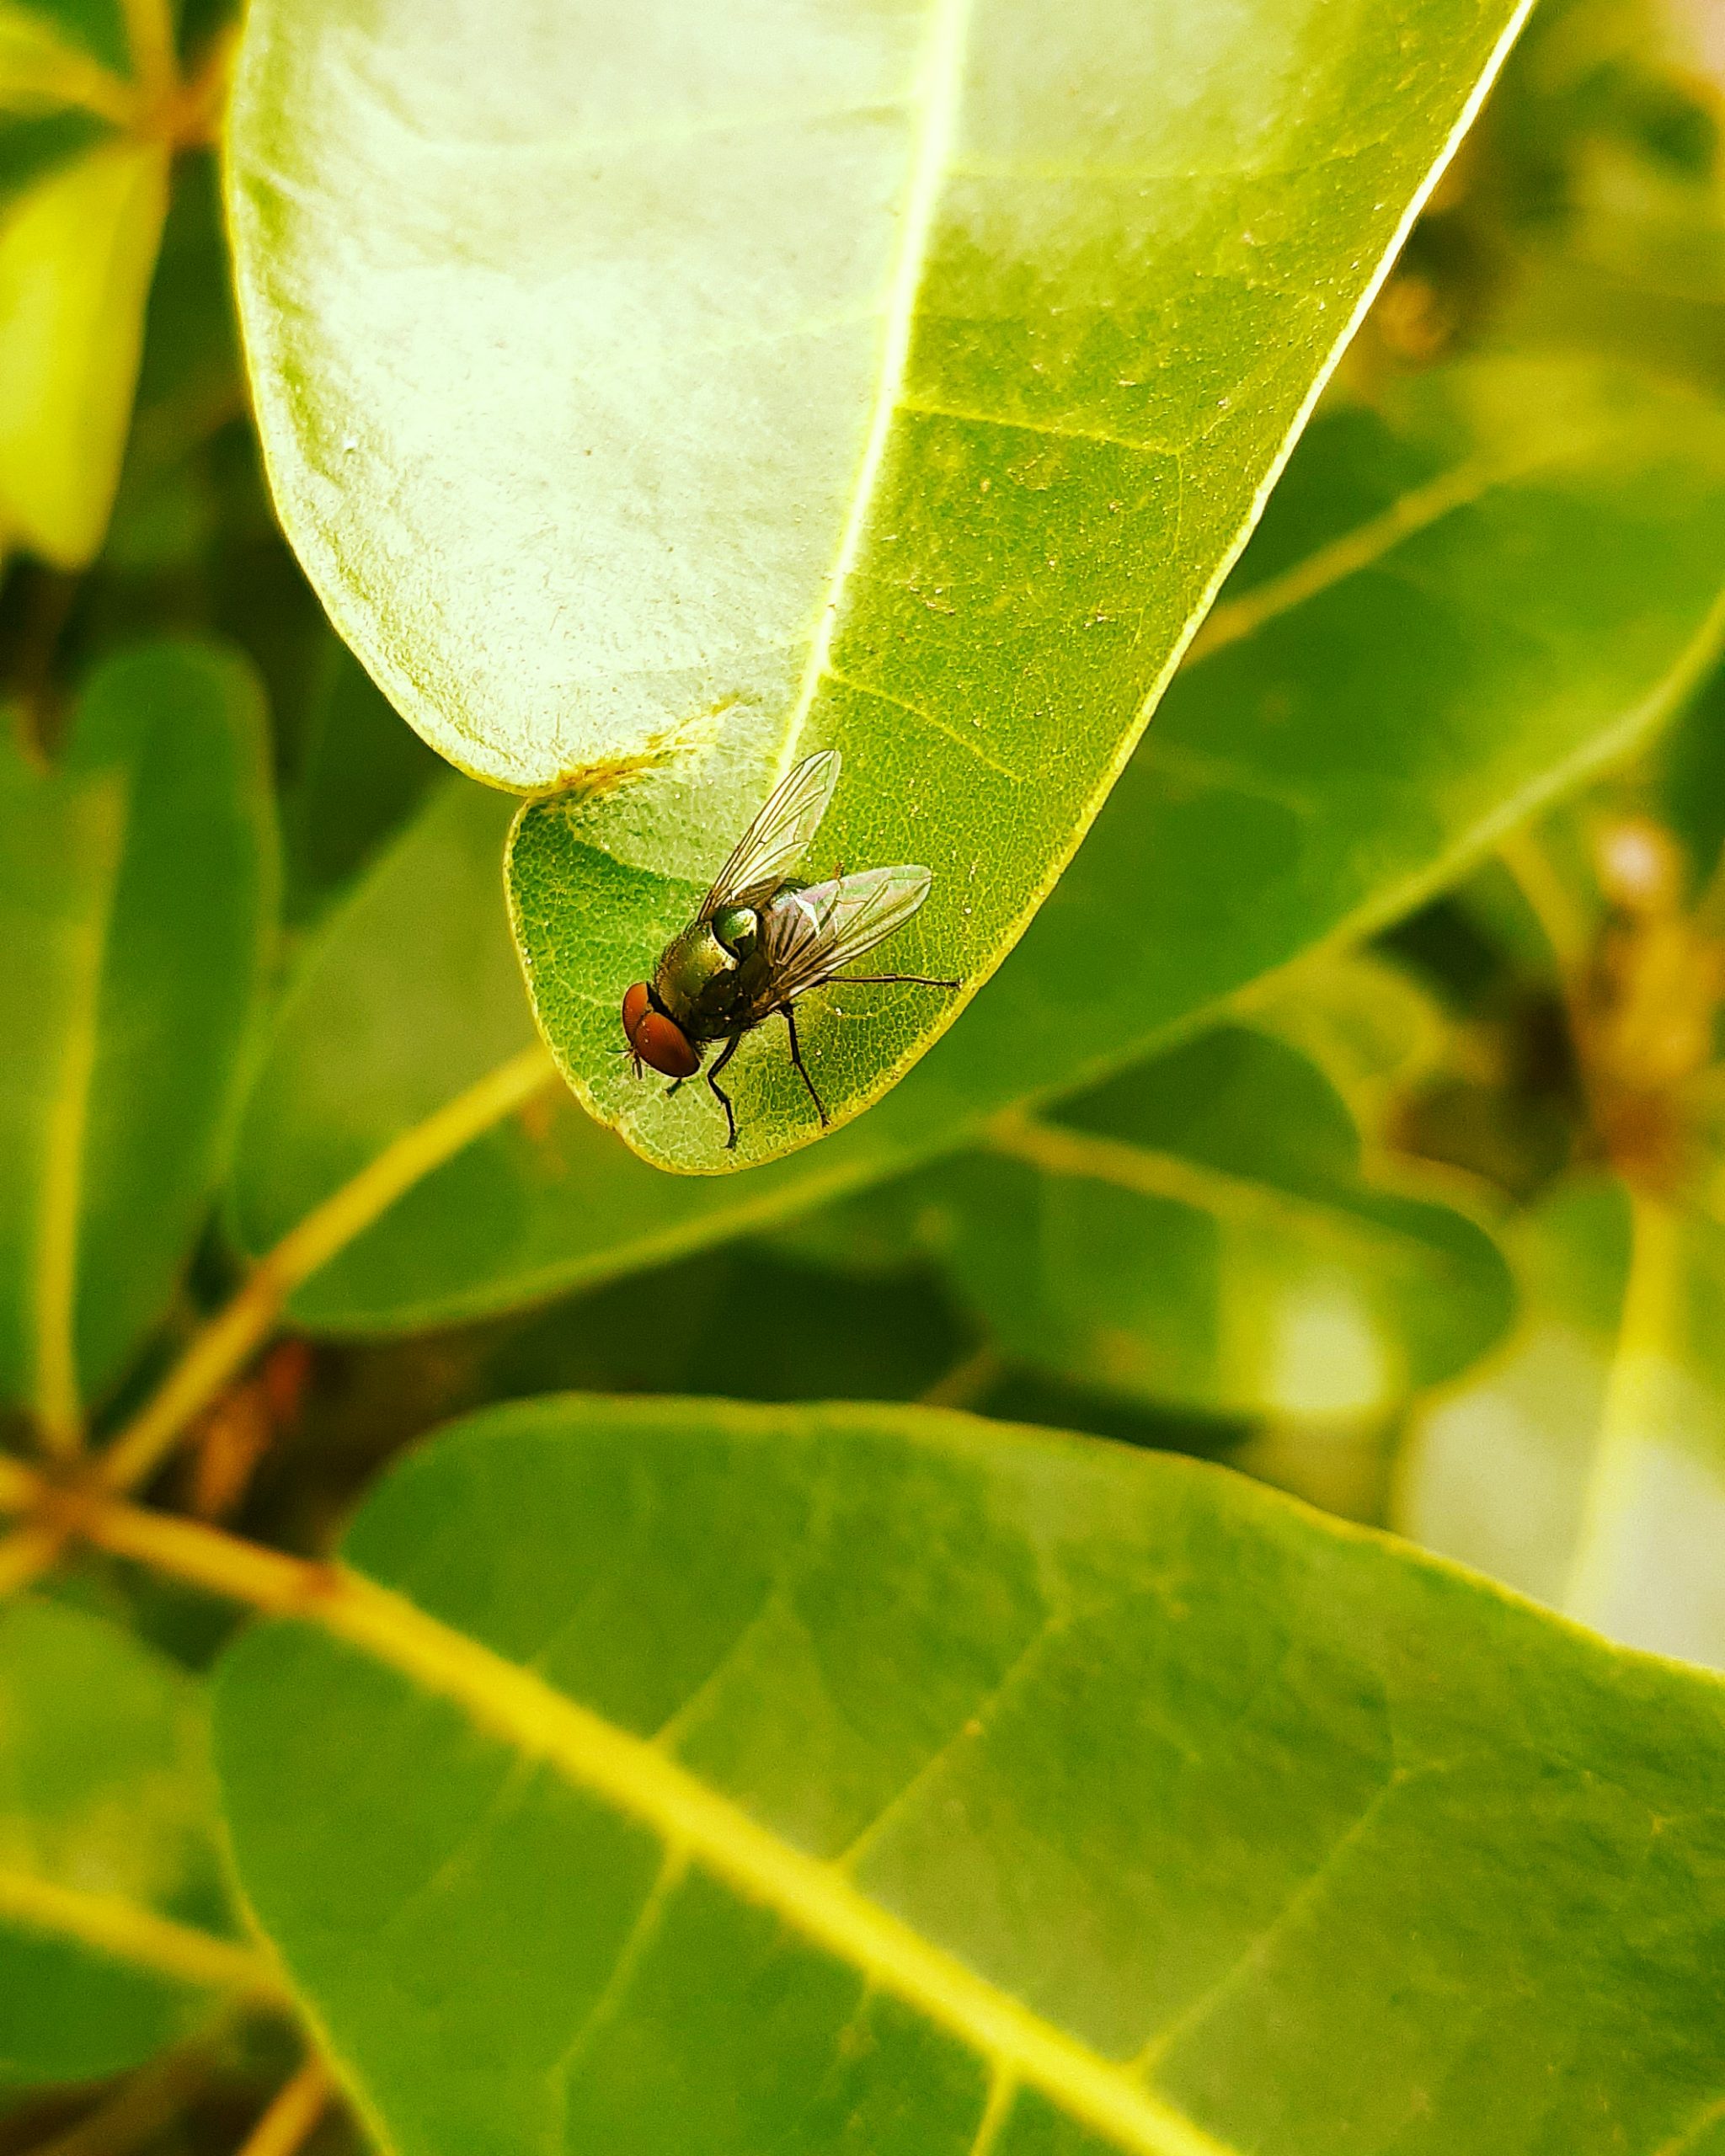 An insect sitting on a large leave